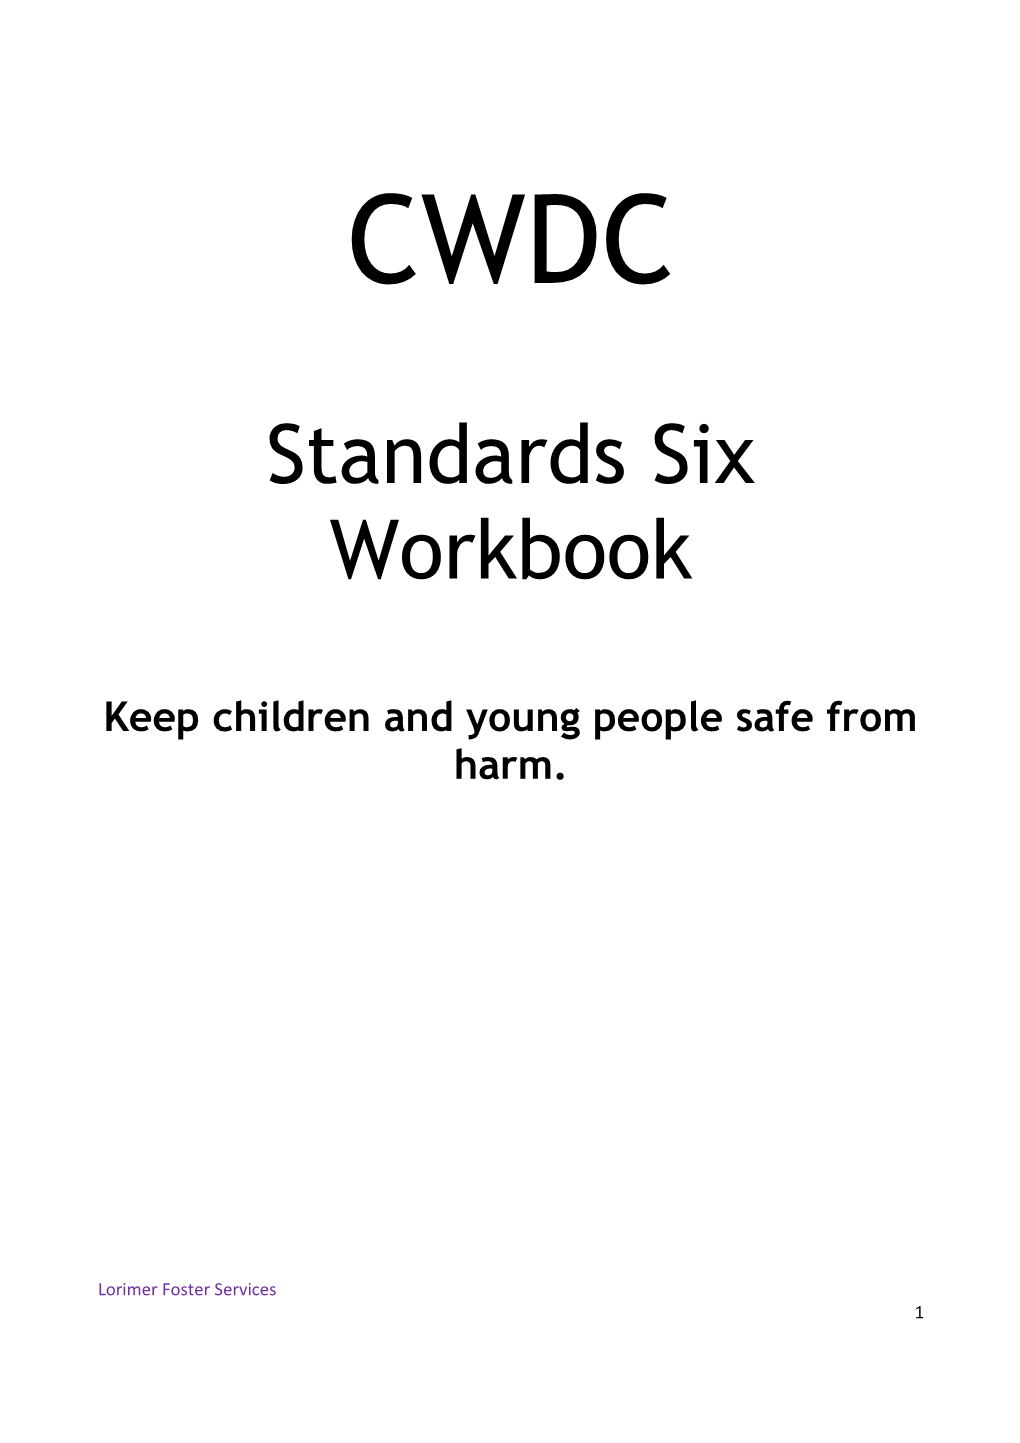 Keep Children and Young People Safe from Harm